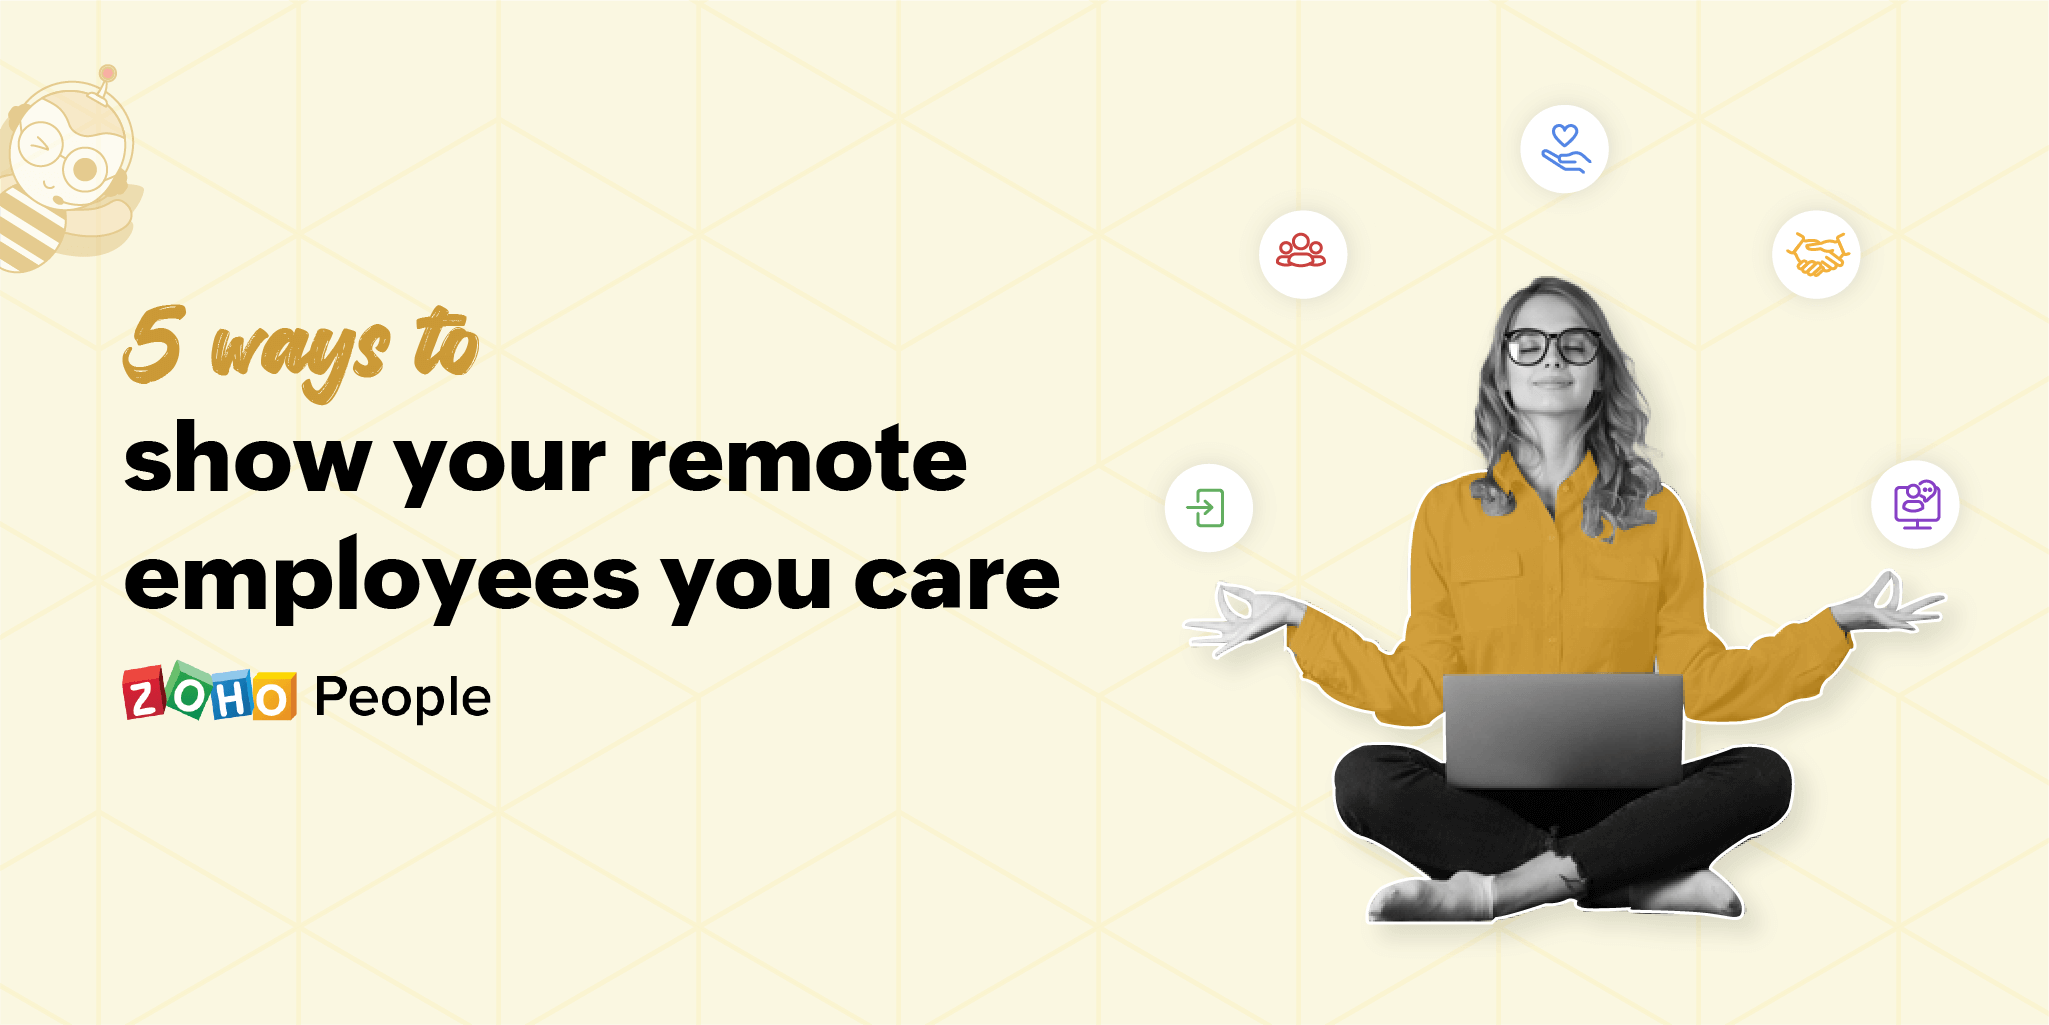 How to care for remote employees